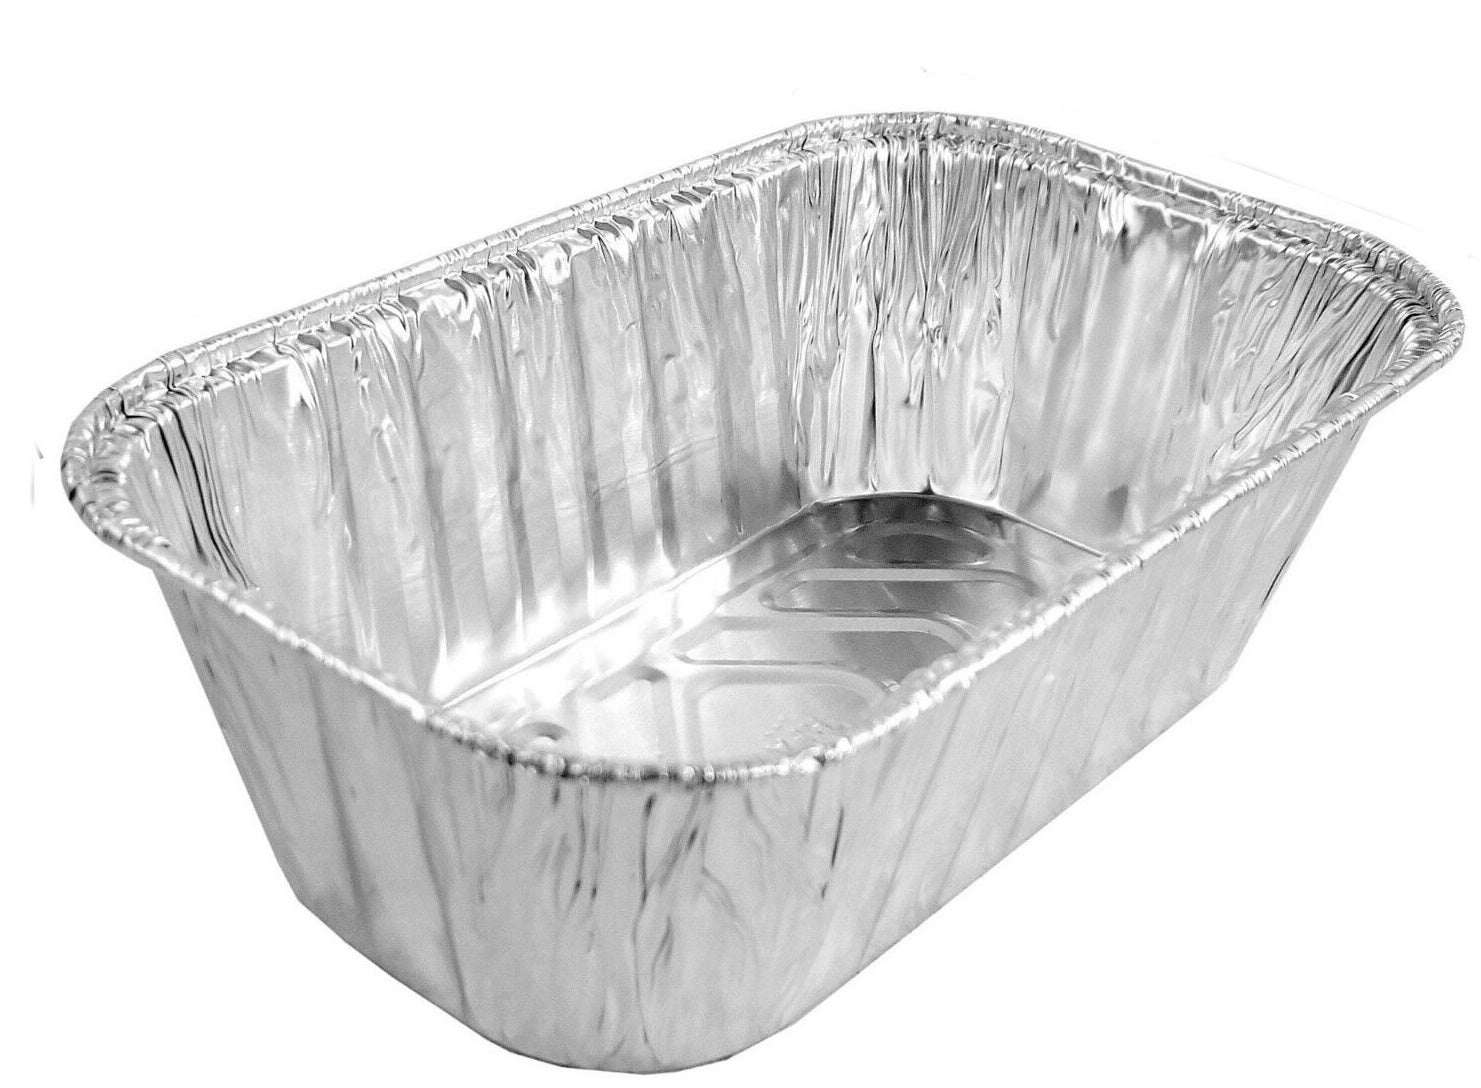 Waytiffer 50 Pack 1Lb mini Loaf Pans Heavy Duty Disposable Aluminum Foil  Bread Tins Standard Size - 6 X 3.5 X 2.5 Oven Safe Sturdy Small Bread  Tin